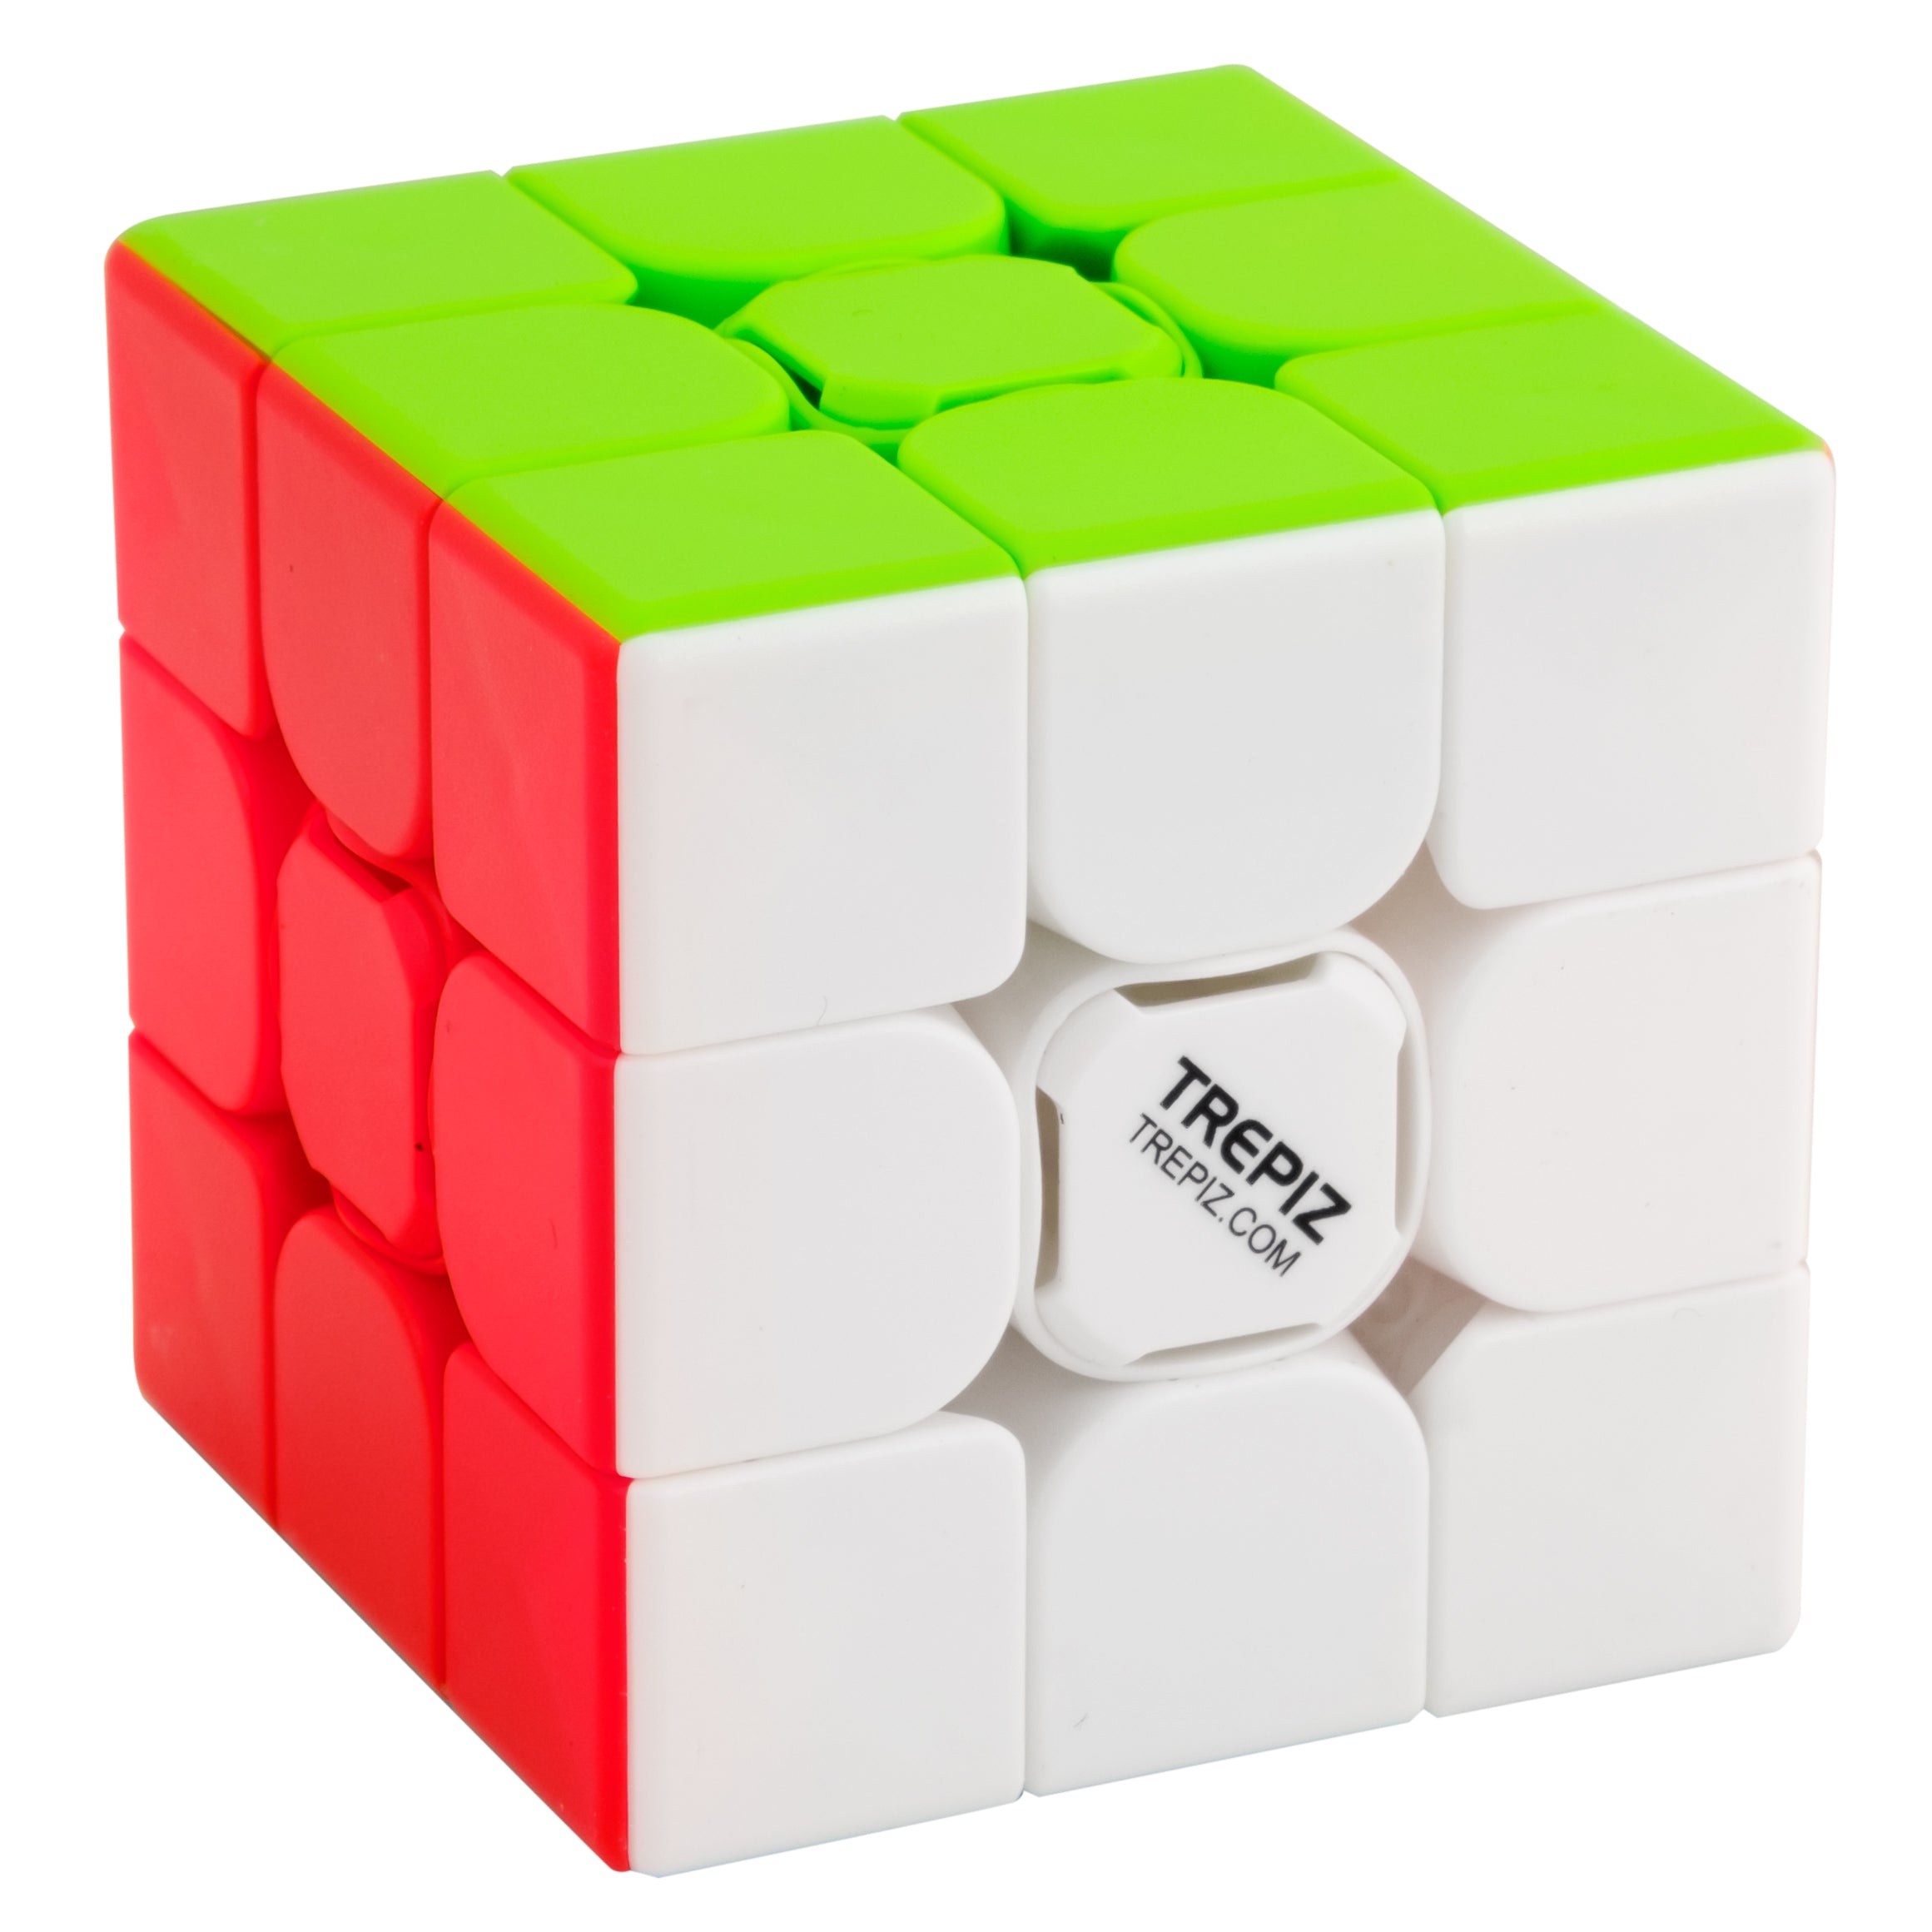 Trepiz Speed Cube 3x3 - Buttery Smooth, Ultra Durable Magic Cube with  Bright Colorful Stickerless Tiles